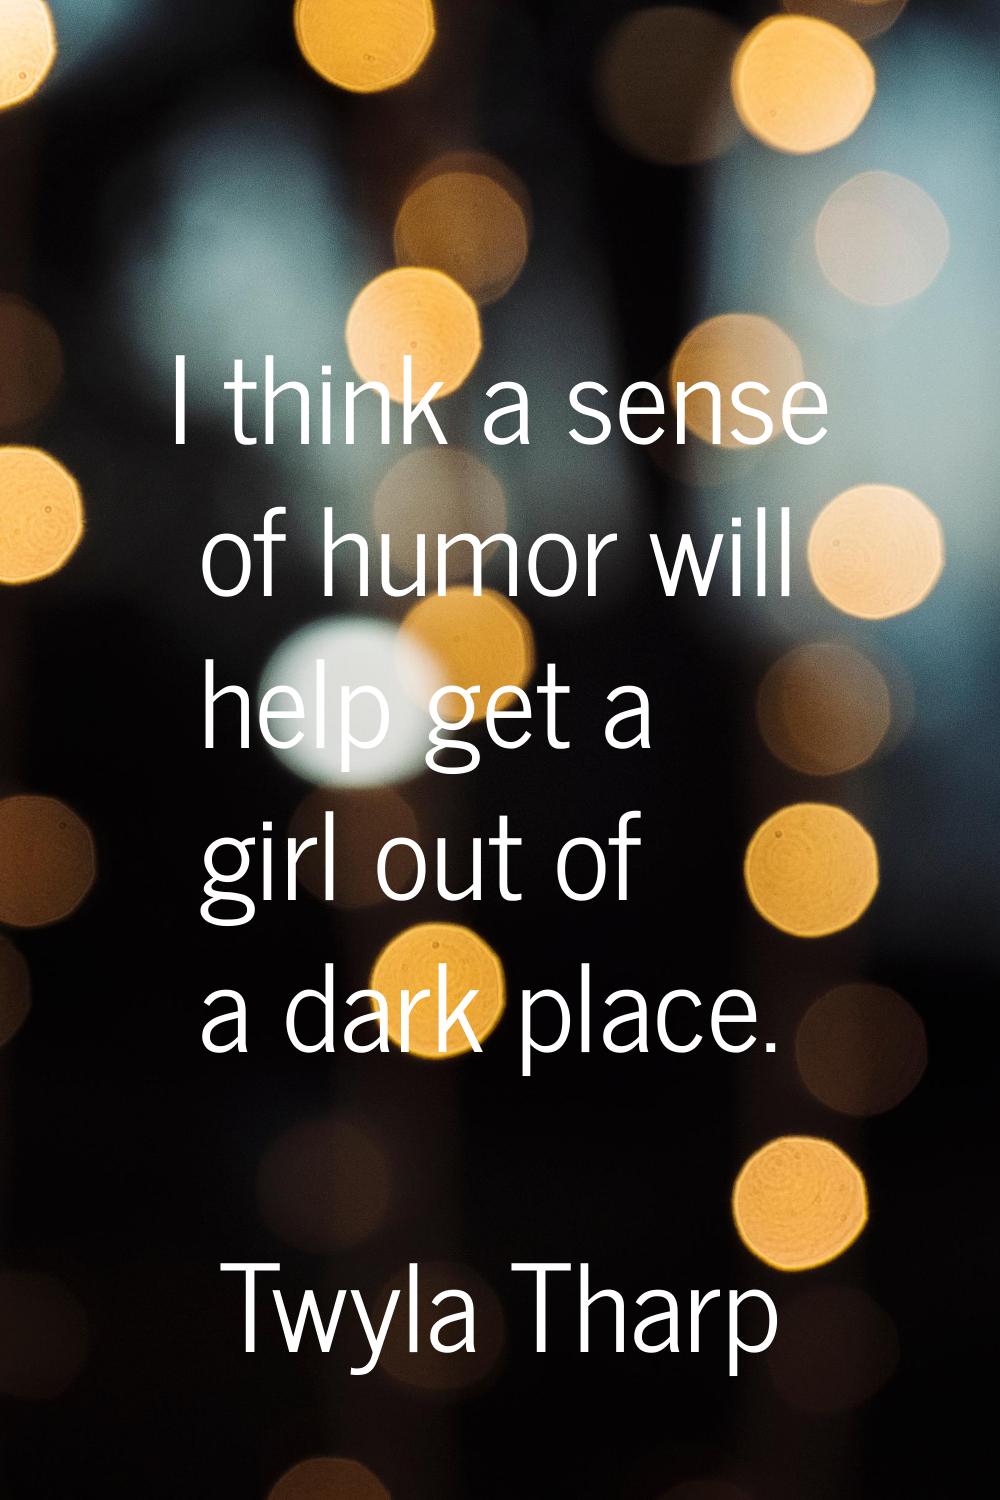 I think a sense of humor will help get a girl out of a dark place.